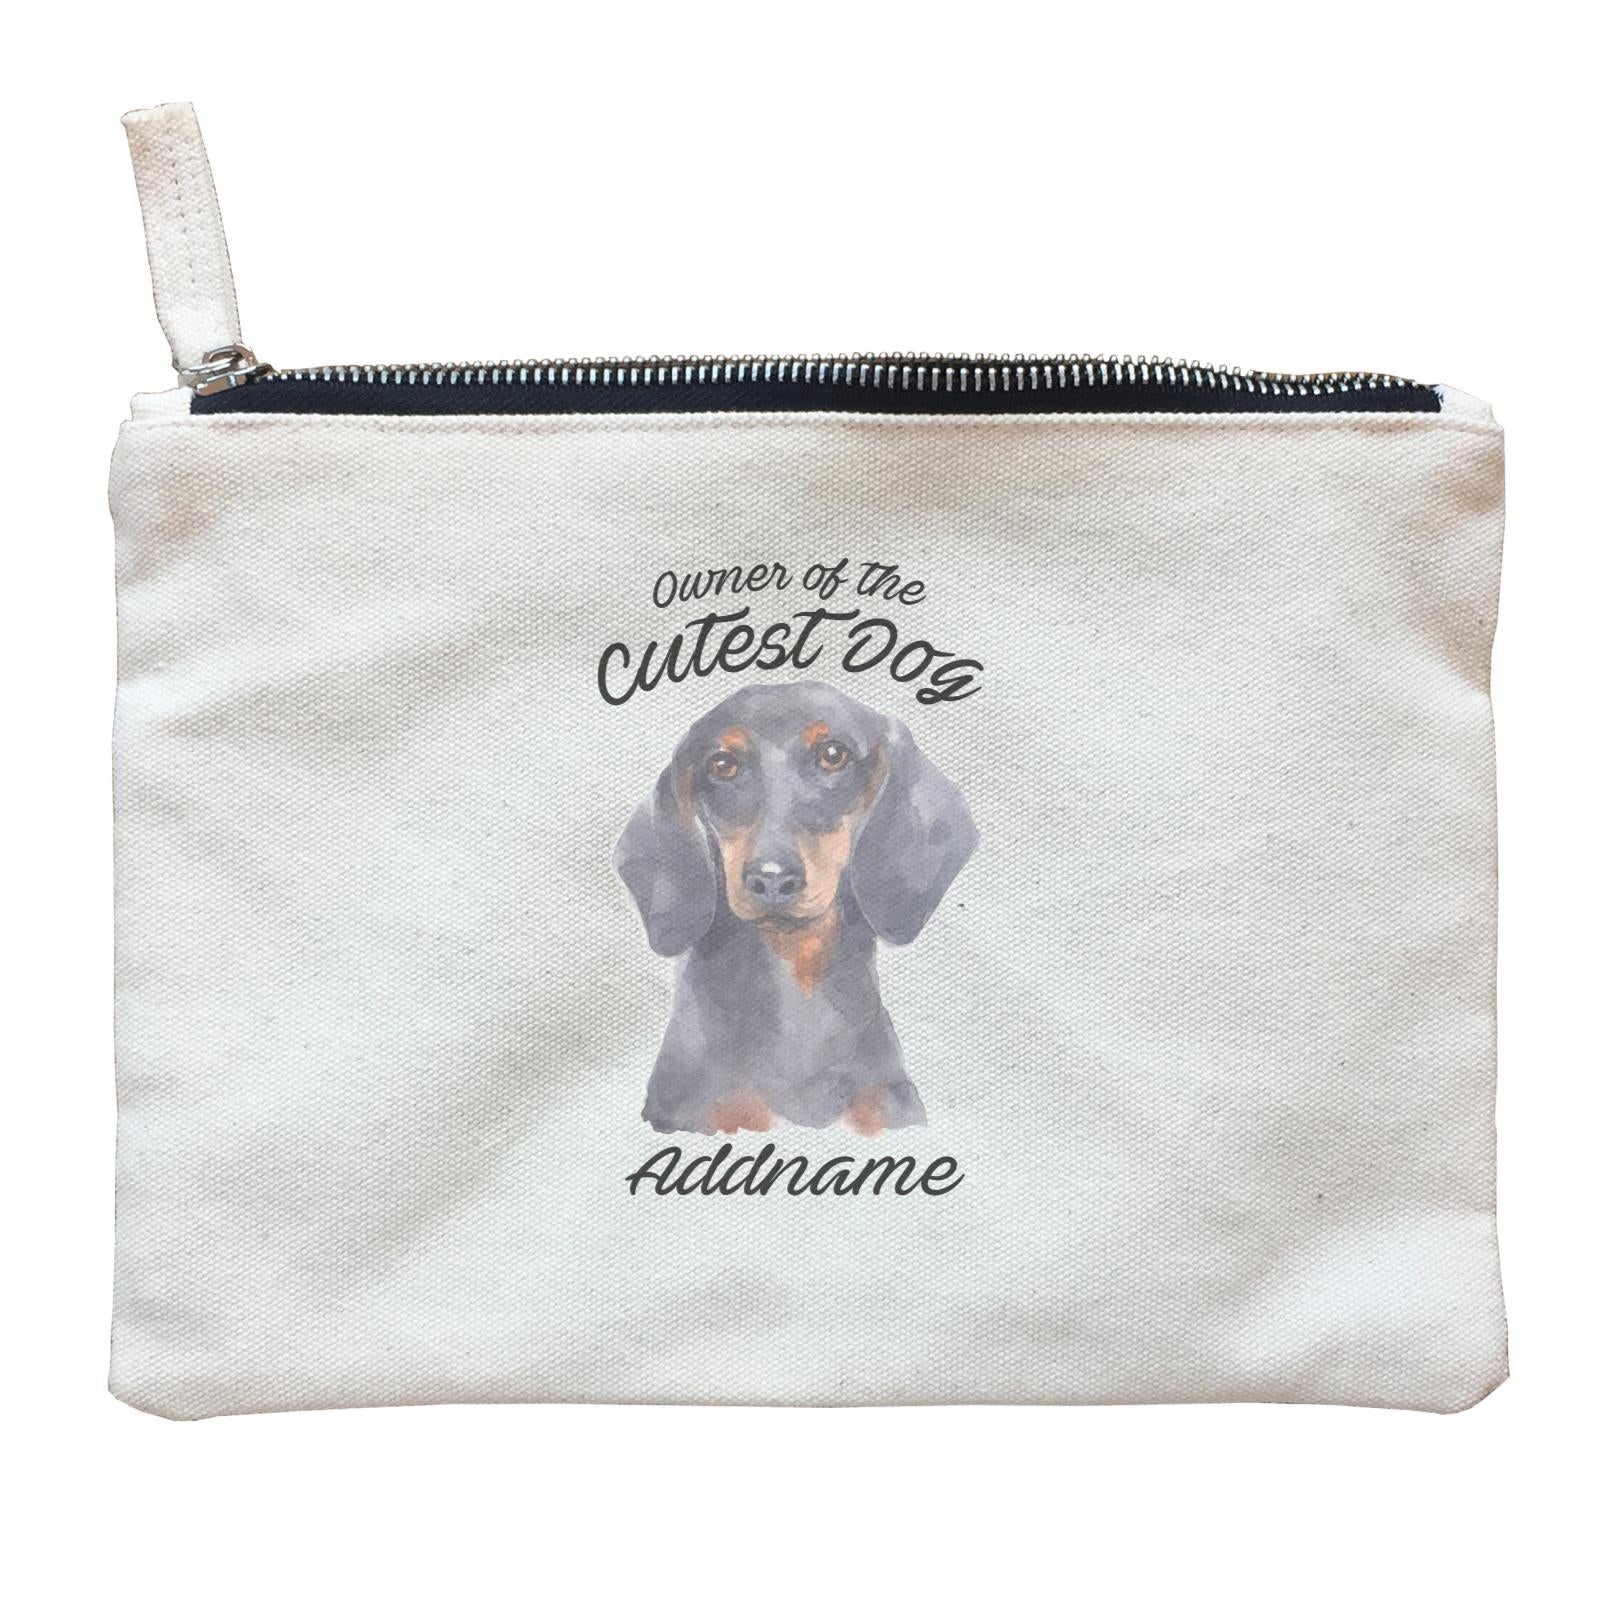 Watercolor Dog Owner Of The Cutest Dog Dachshund Addname Zipper Pouch